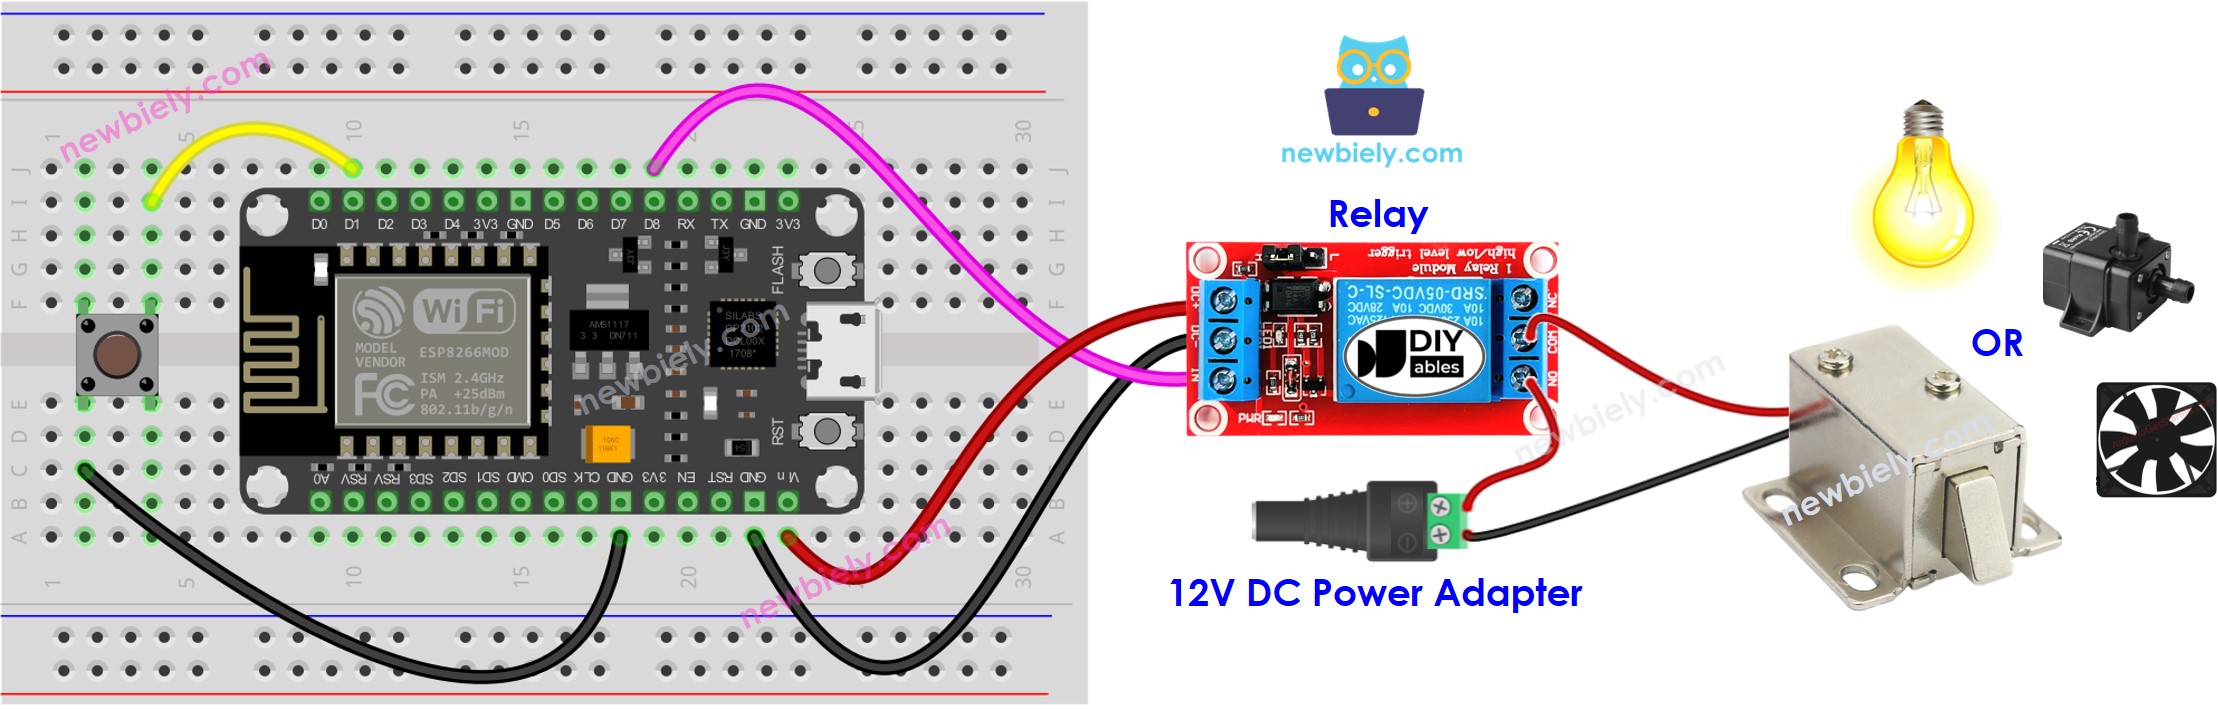 The wiring diagram between ESP8266 NodeMCU and Button relay